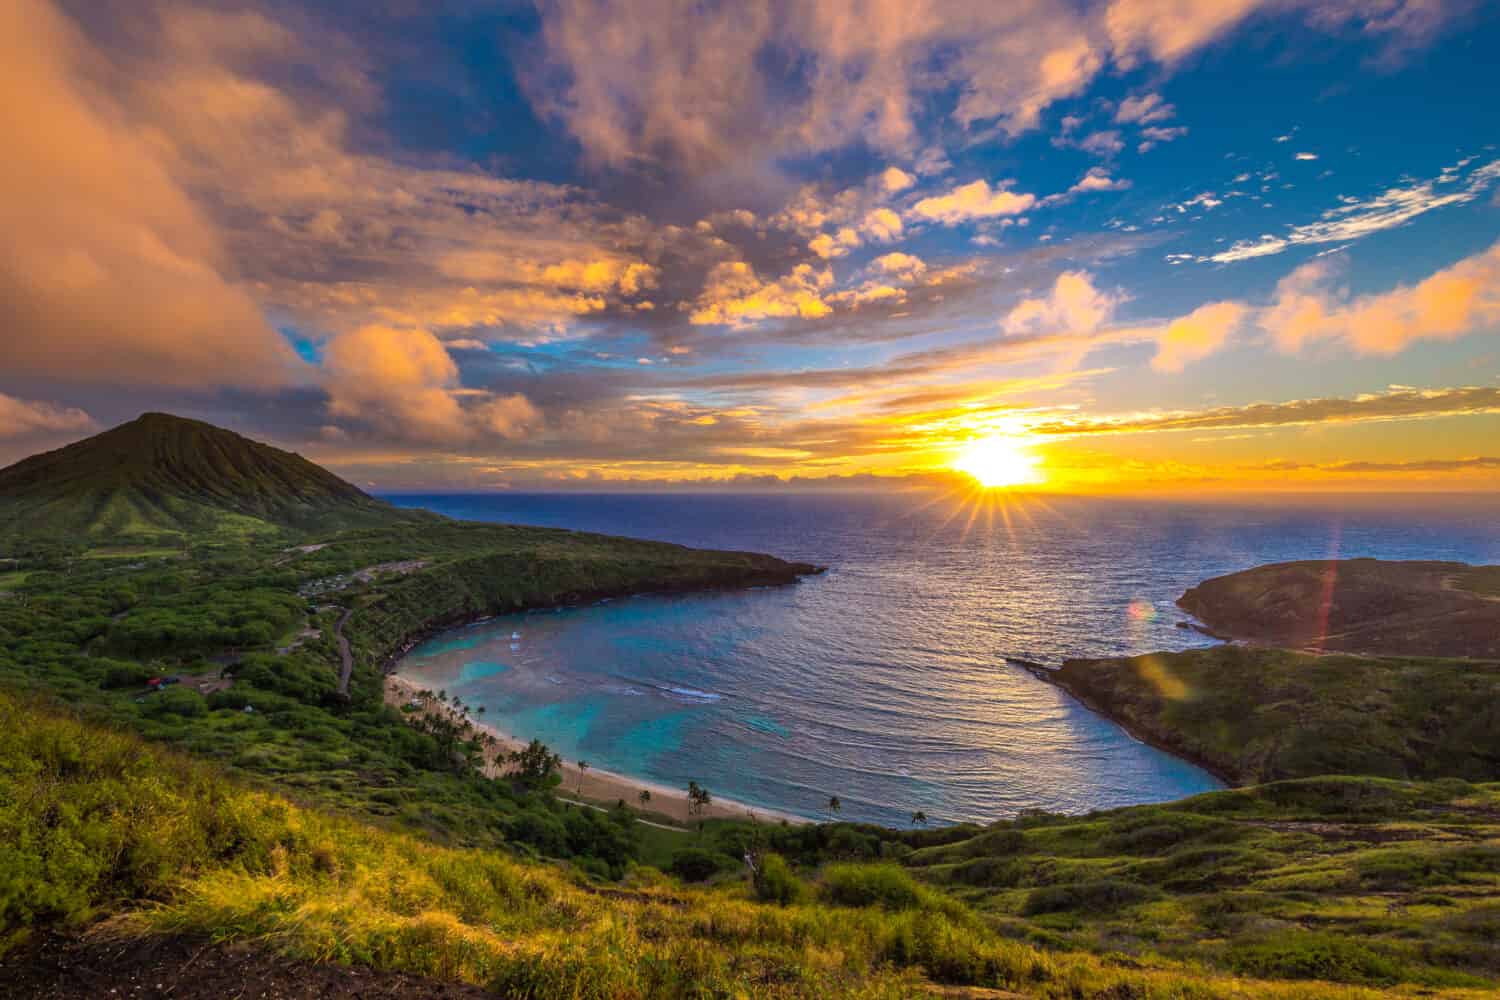 <p>The bay is protected by vertical crater walls formed in a volcanic cone east of Honolulu at nearby Koko Head. This reef ensures tranquil waters ideal for snorkeling and swimming. Hundreds of species of coral and fish such as butterflyfish, moray eels, sea turtles, spinner dolphins, and octopus inhabit the reef.</p>